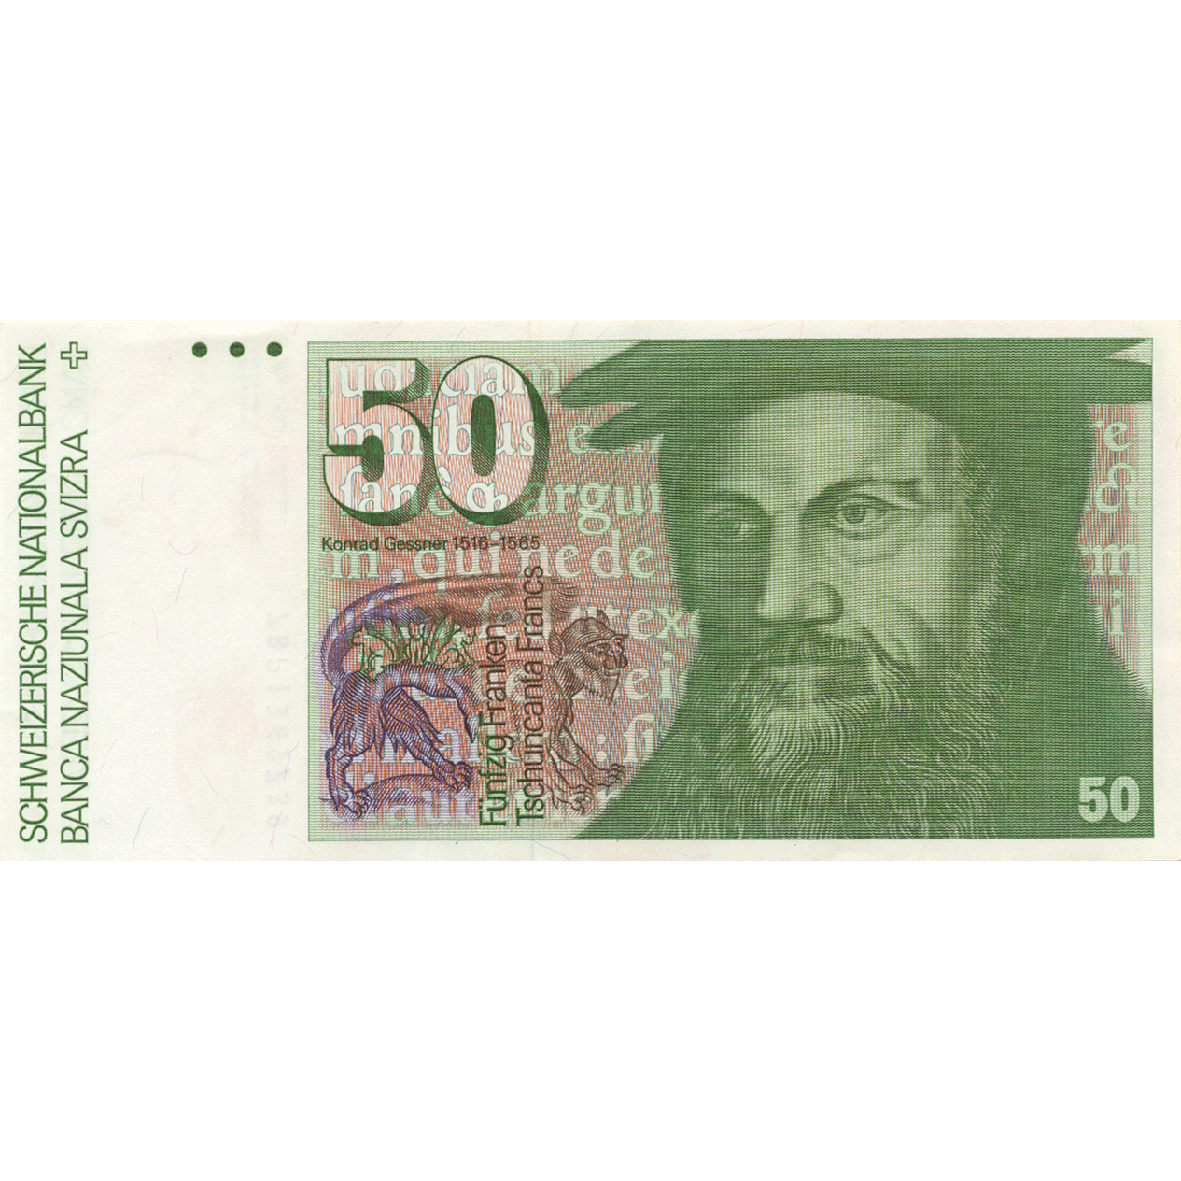 Swiss Confederation, 50 Francs (6th Banknote Series, in Circulation 1976-2000) (obverse)